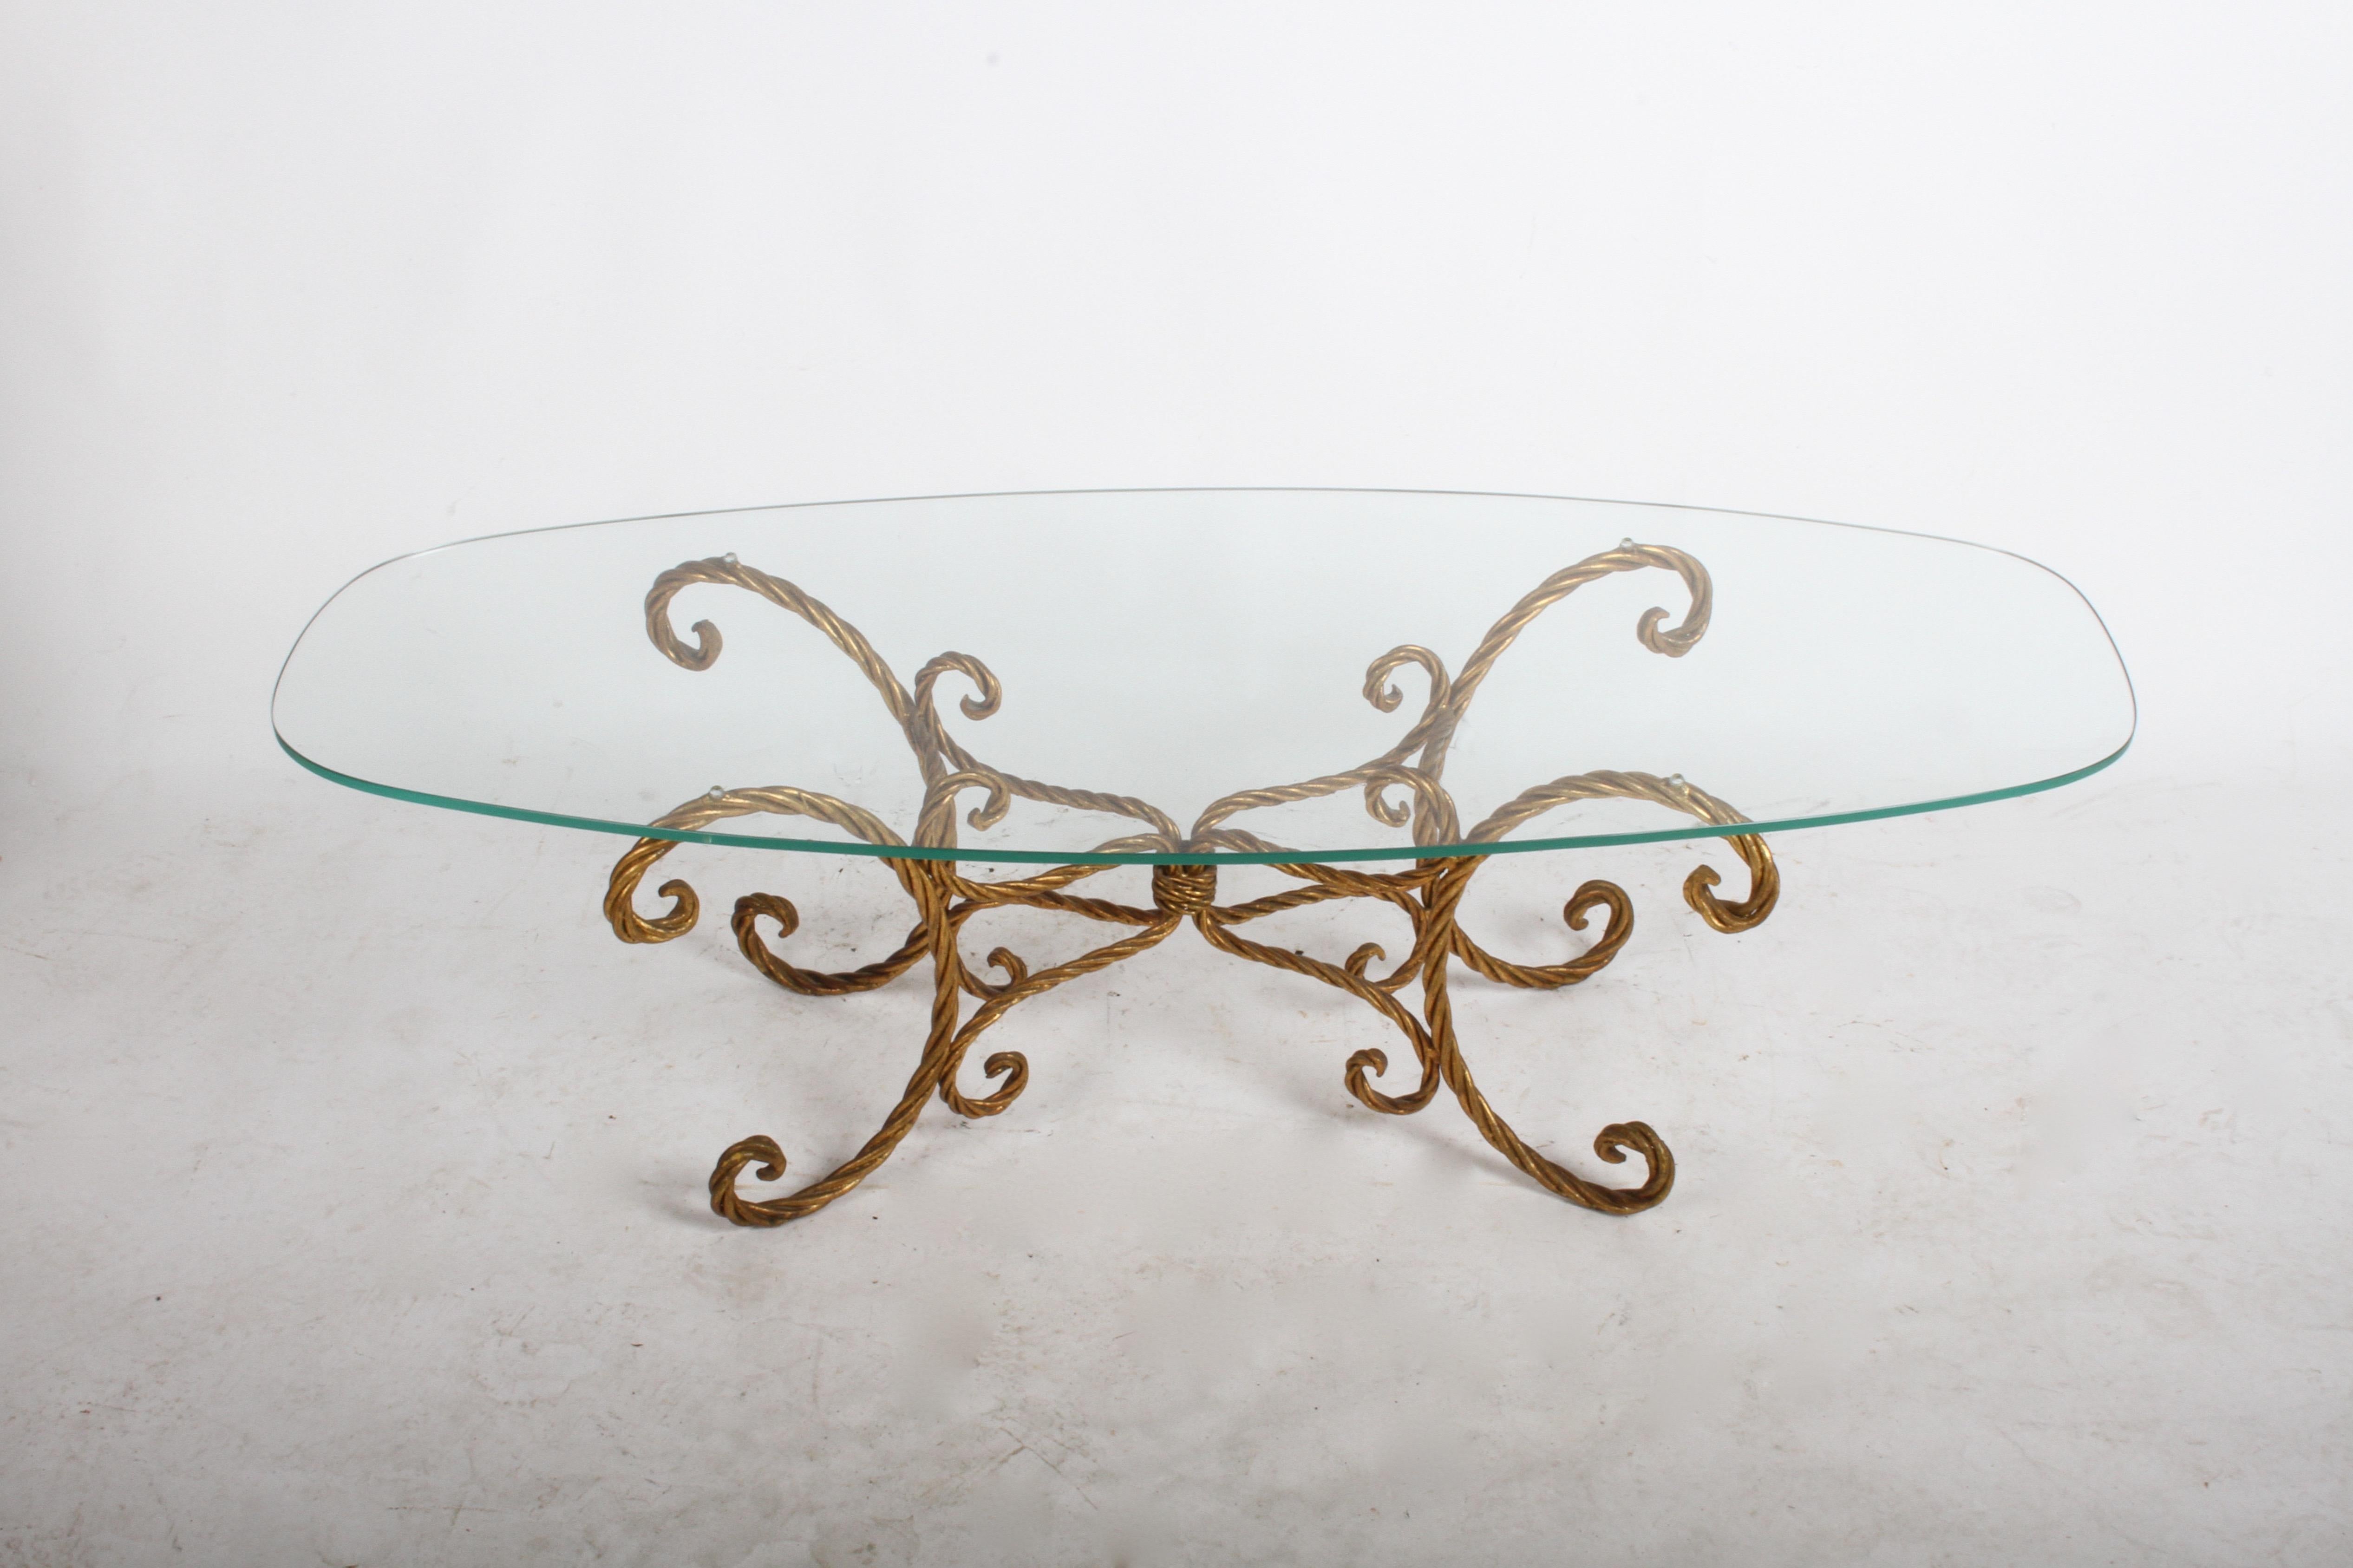 Hollywood Regency or midcentury Italian gilt braided rope coffee table with oval form glass. Original 3/8